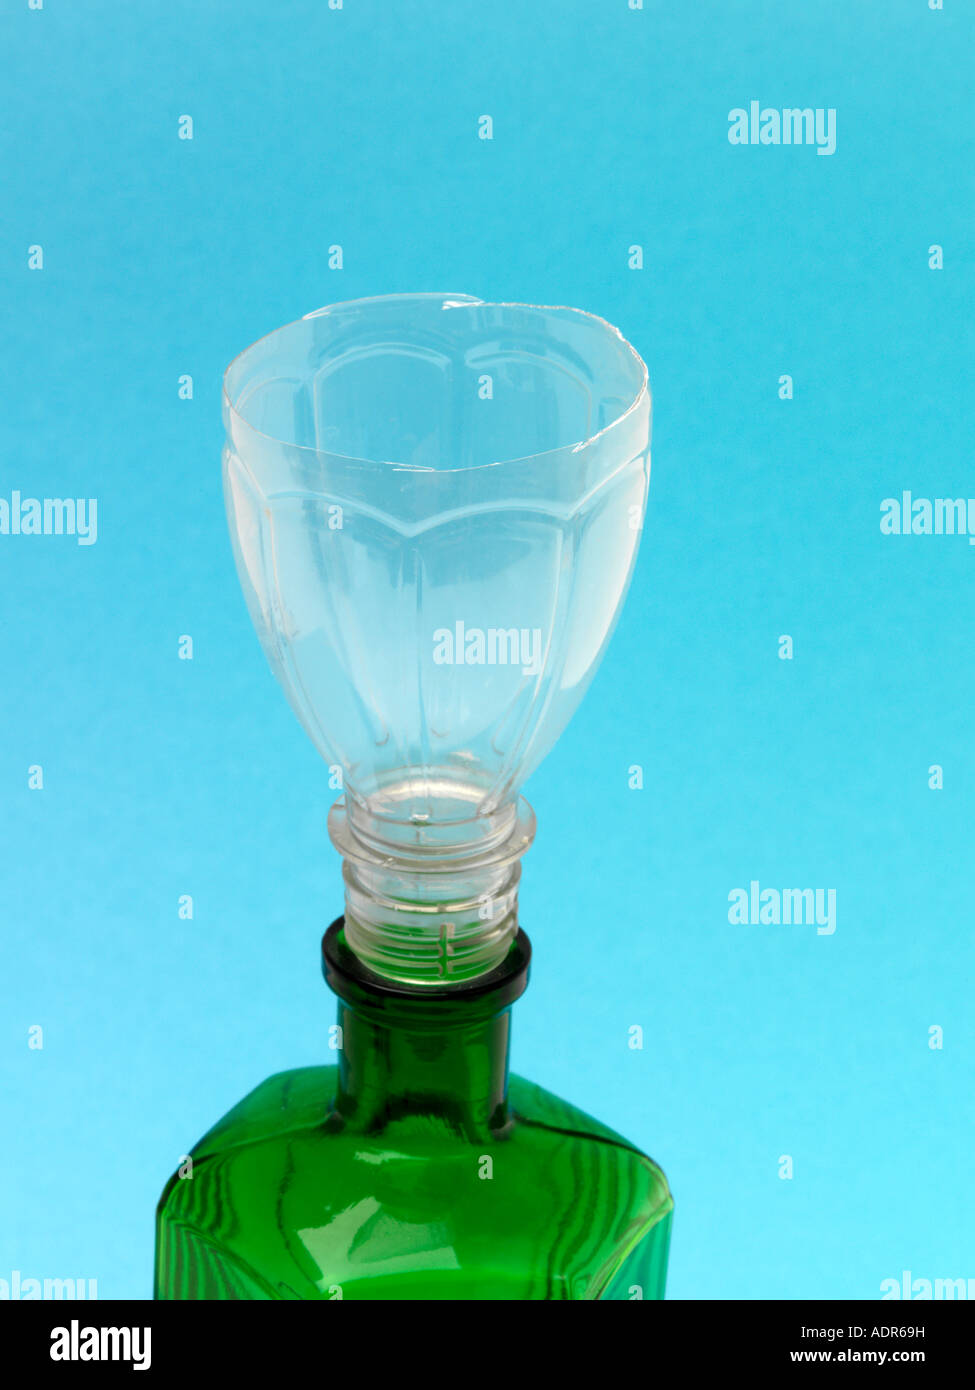 Funnel made from Plastic Bottle and green Glass Bottle Stock Photo